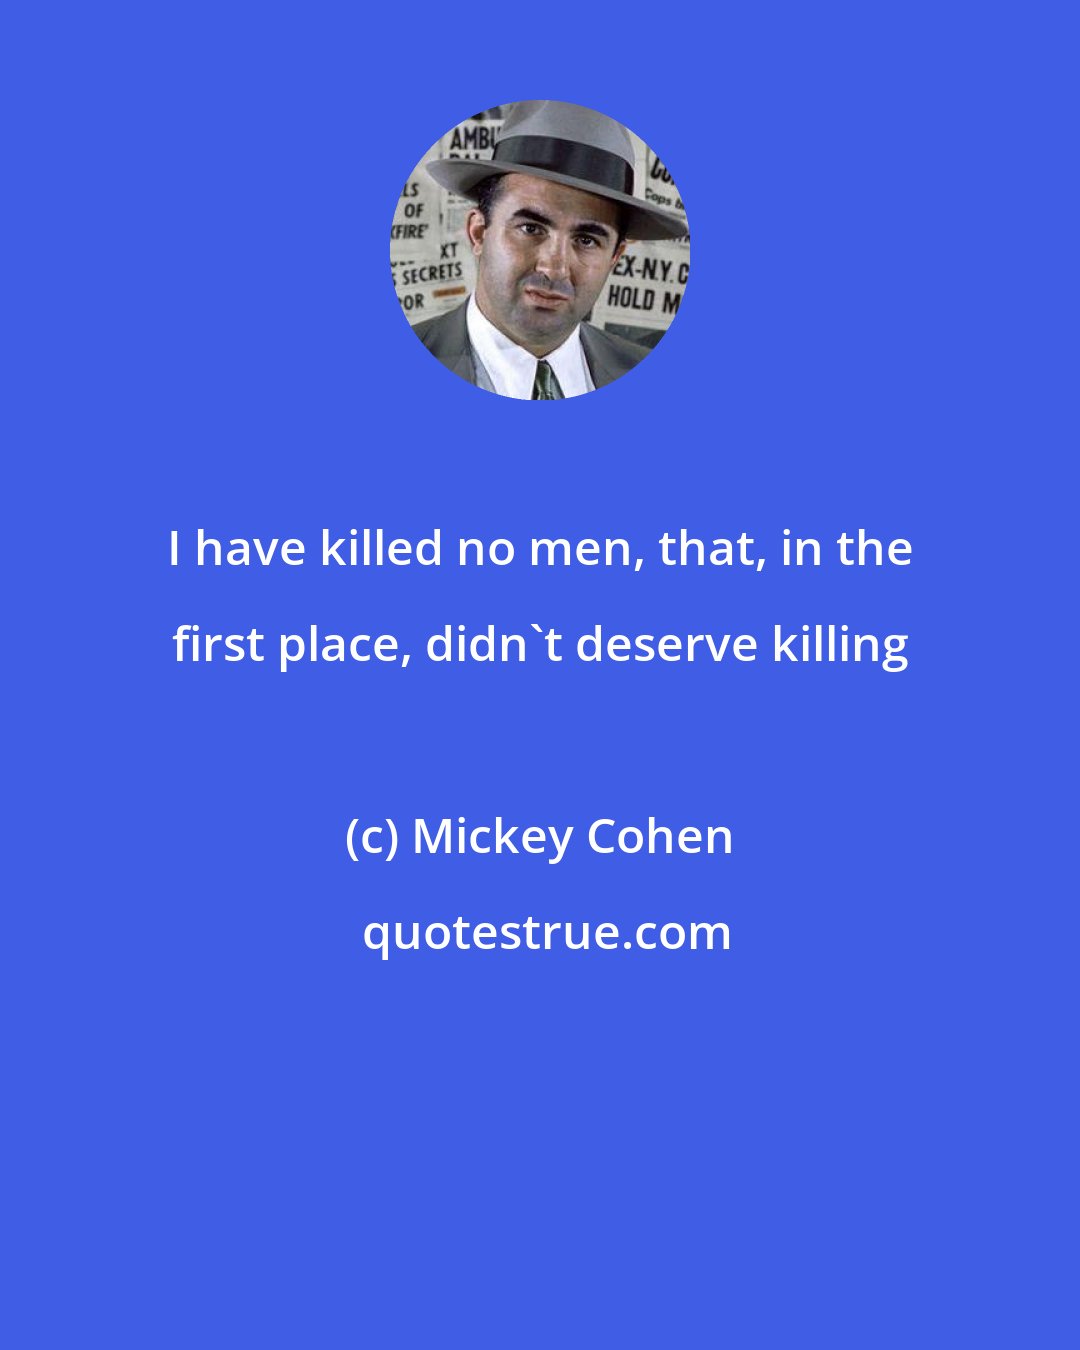 Mickey Cohen: I have killed no men, that, in the first place, didn't deserve killing